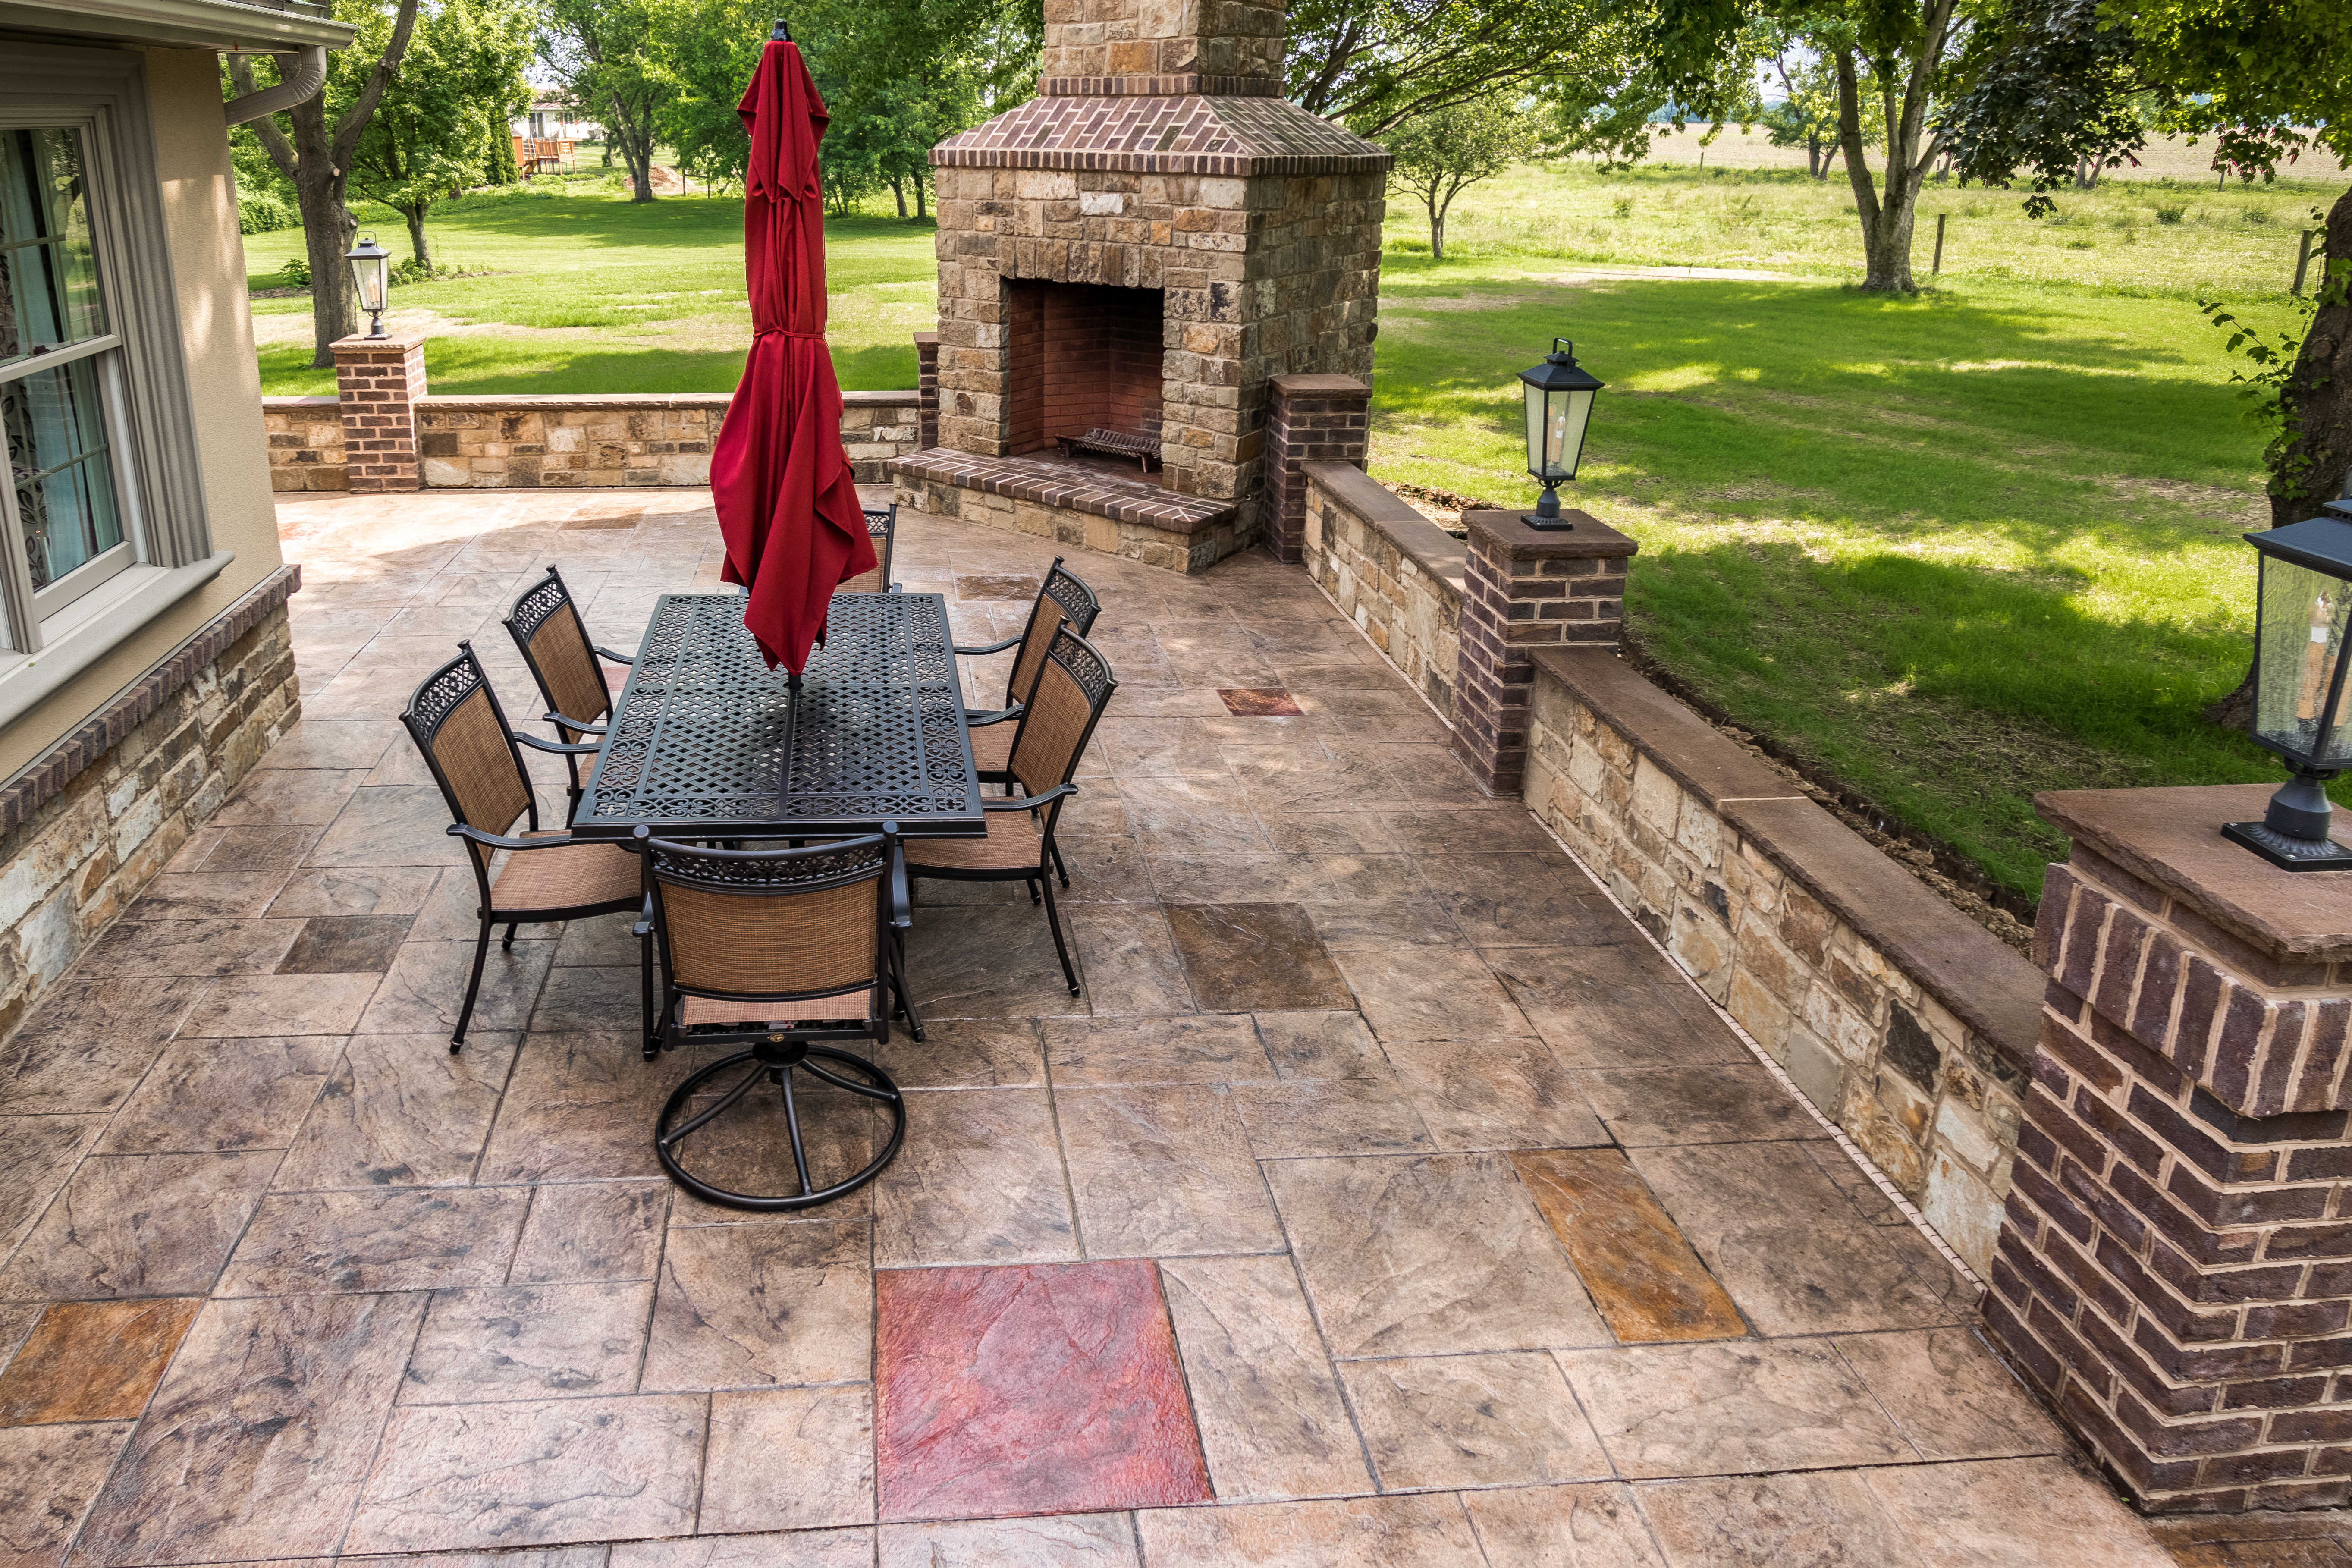 stamped concrete patio 2016-06-04 15.46.41-1 ZBSDNNQ